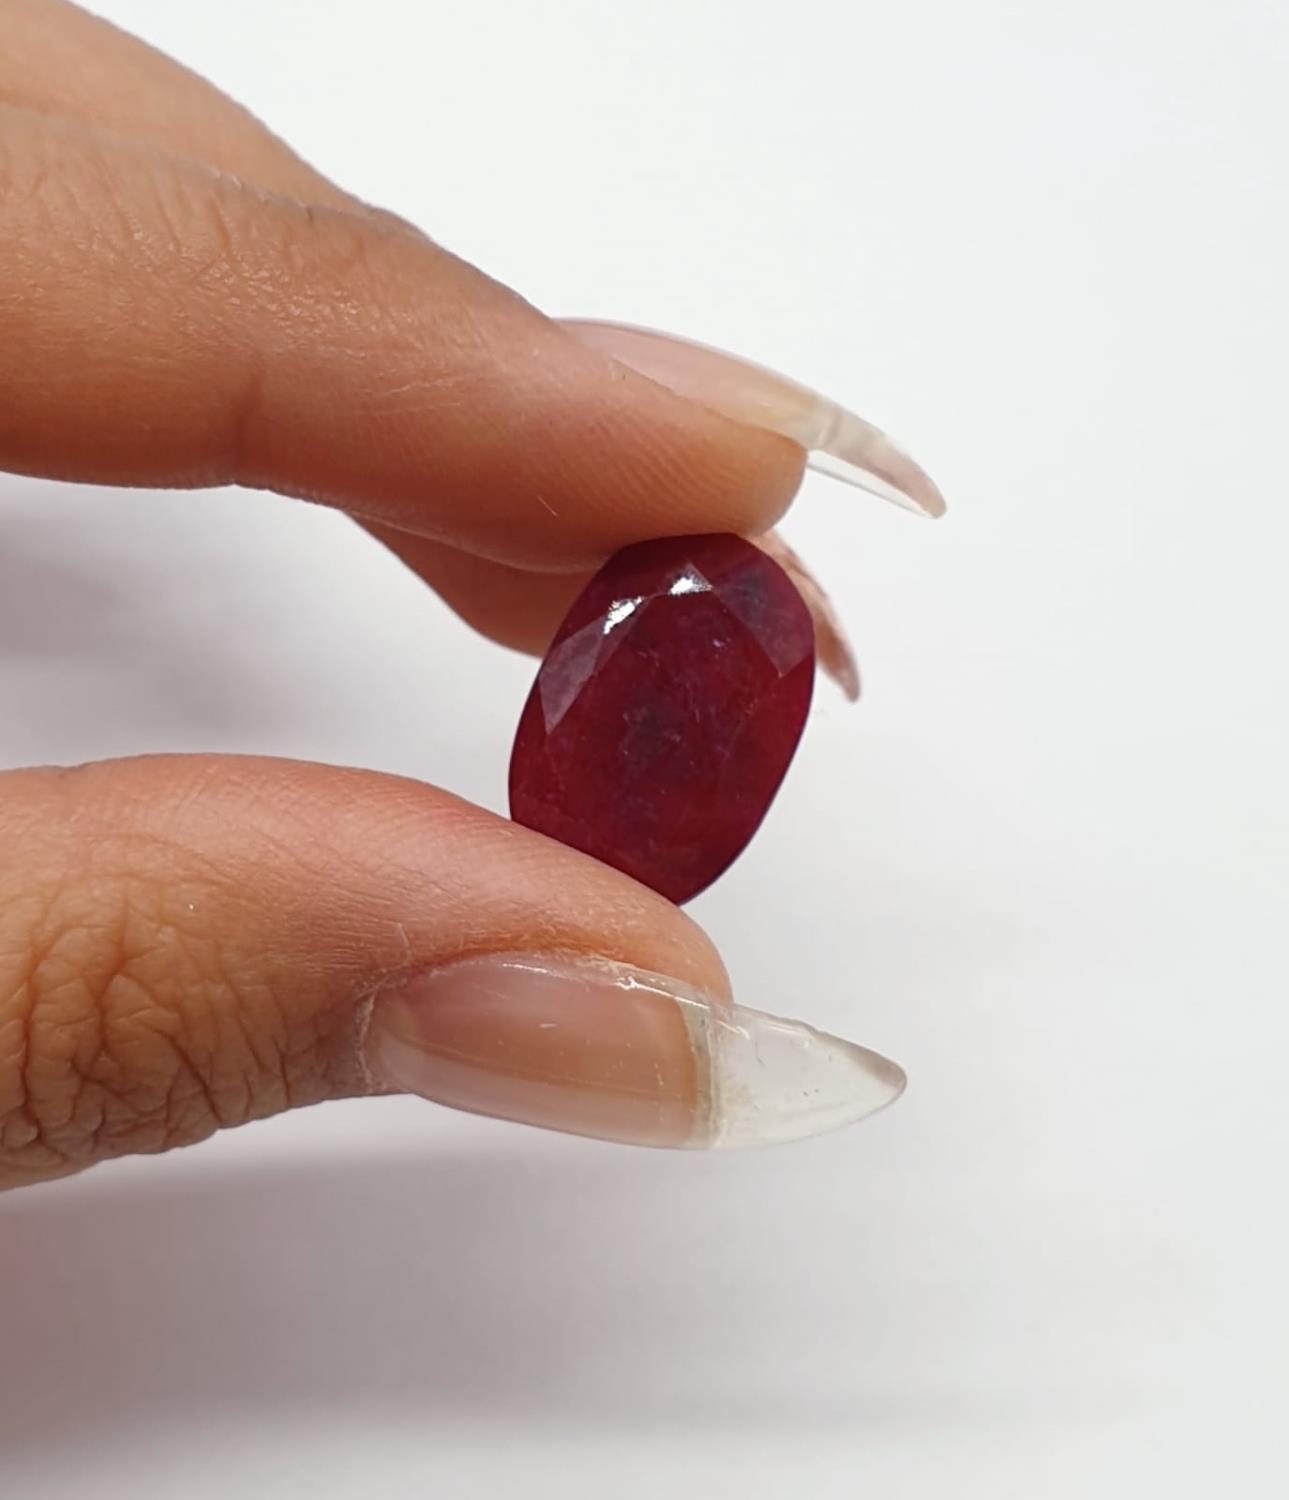 13.68ct Ruby Gemstone IDT CERTIFICATED - Image 4 of 5